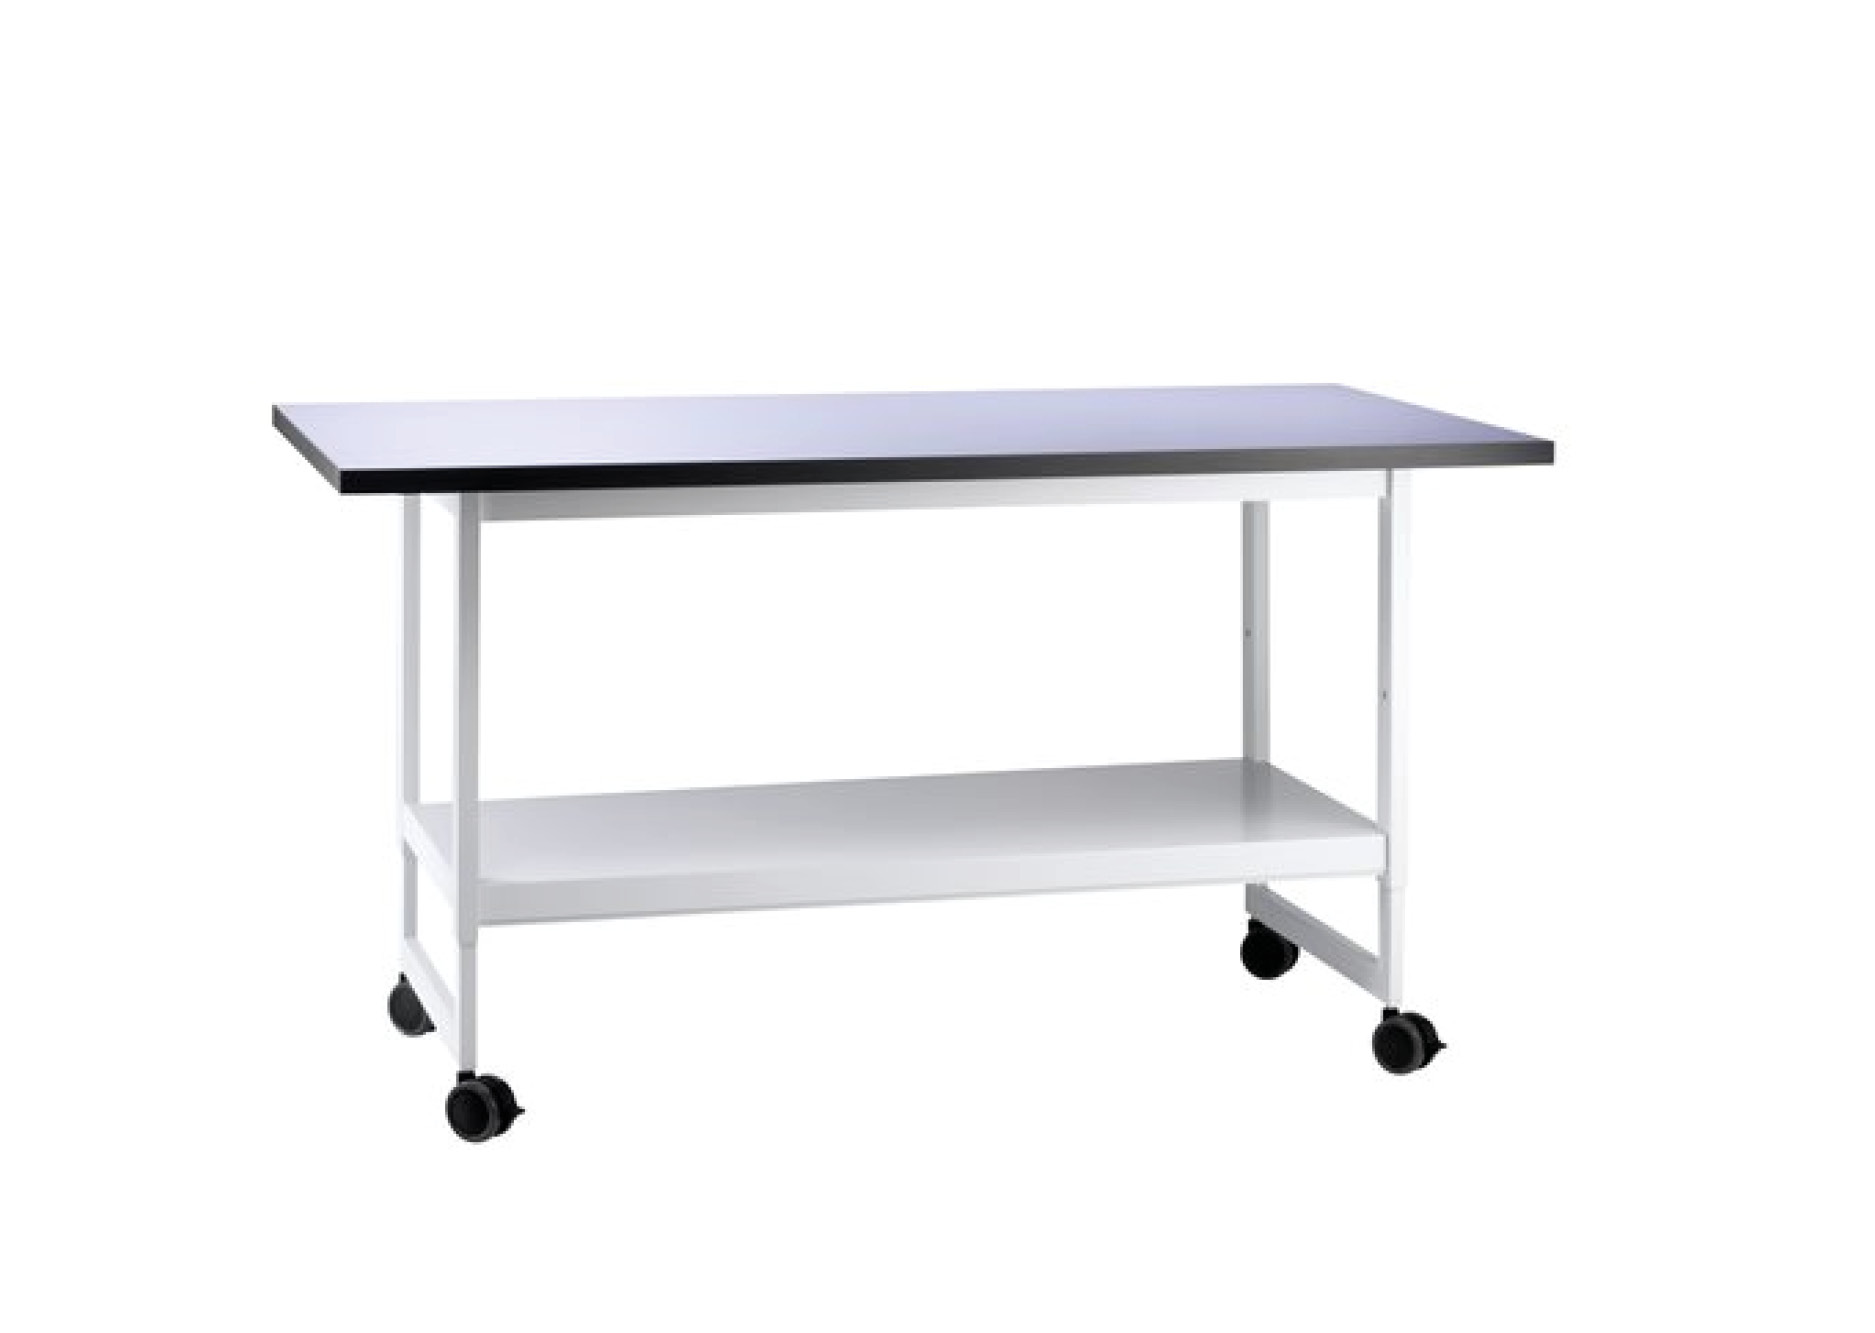 Single tables, weighing tables and frames